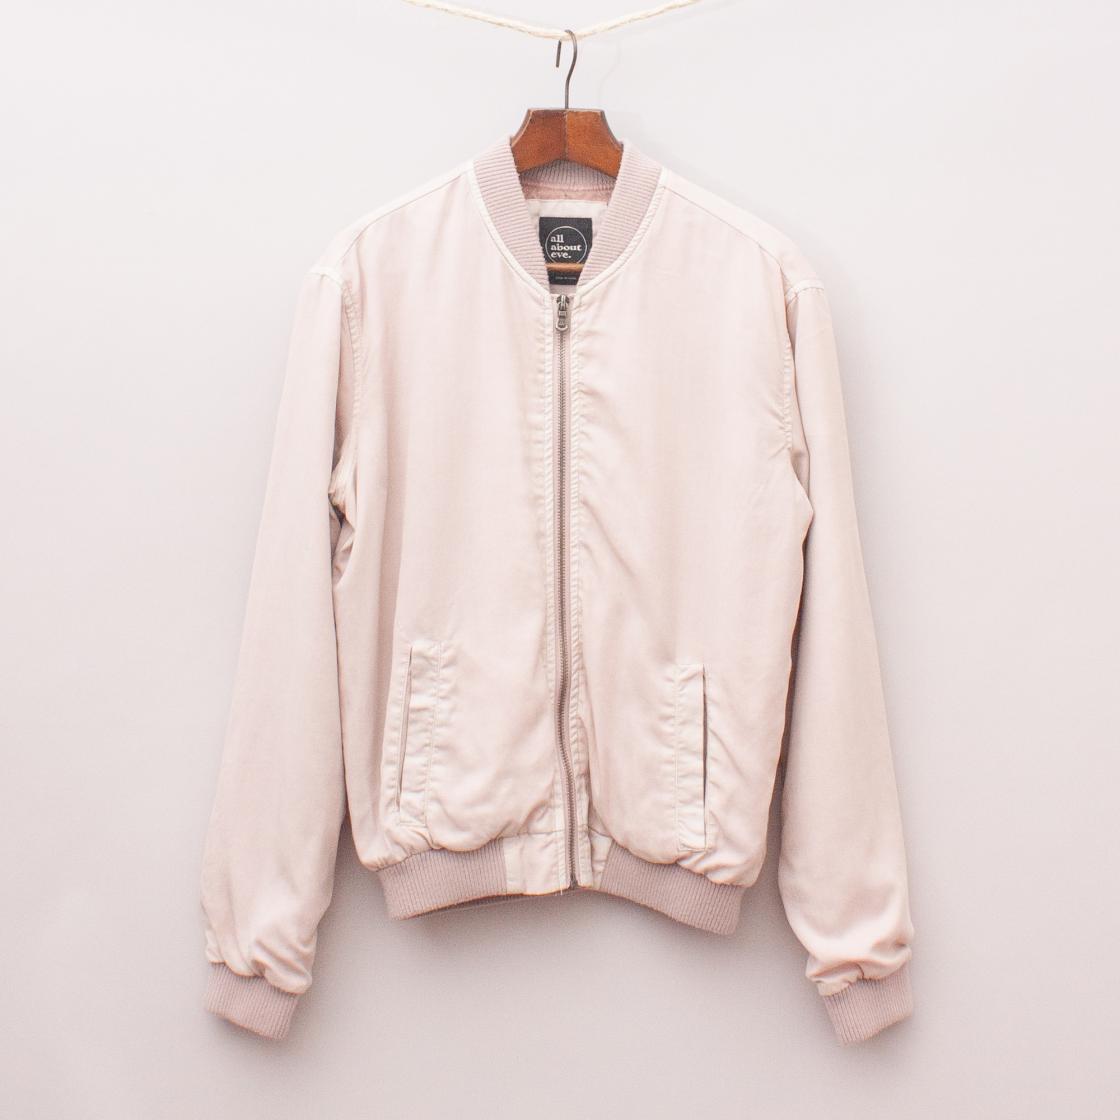 All About Eve Bomber Jacket